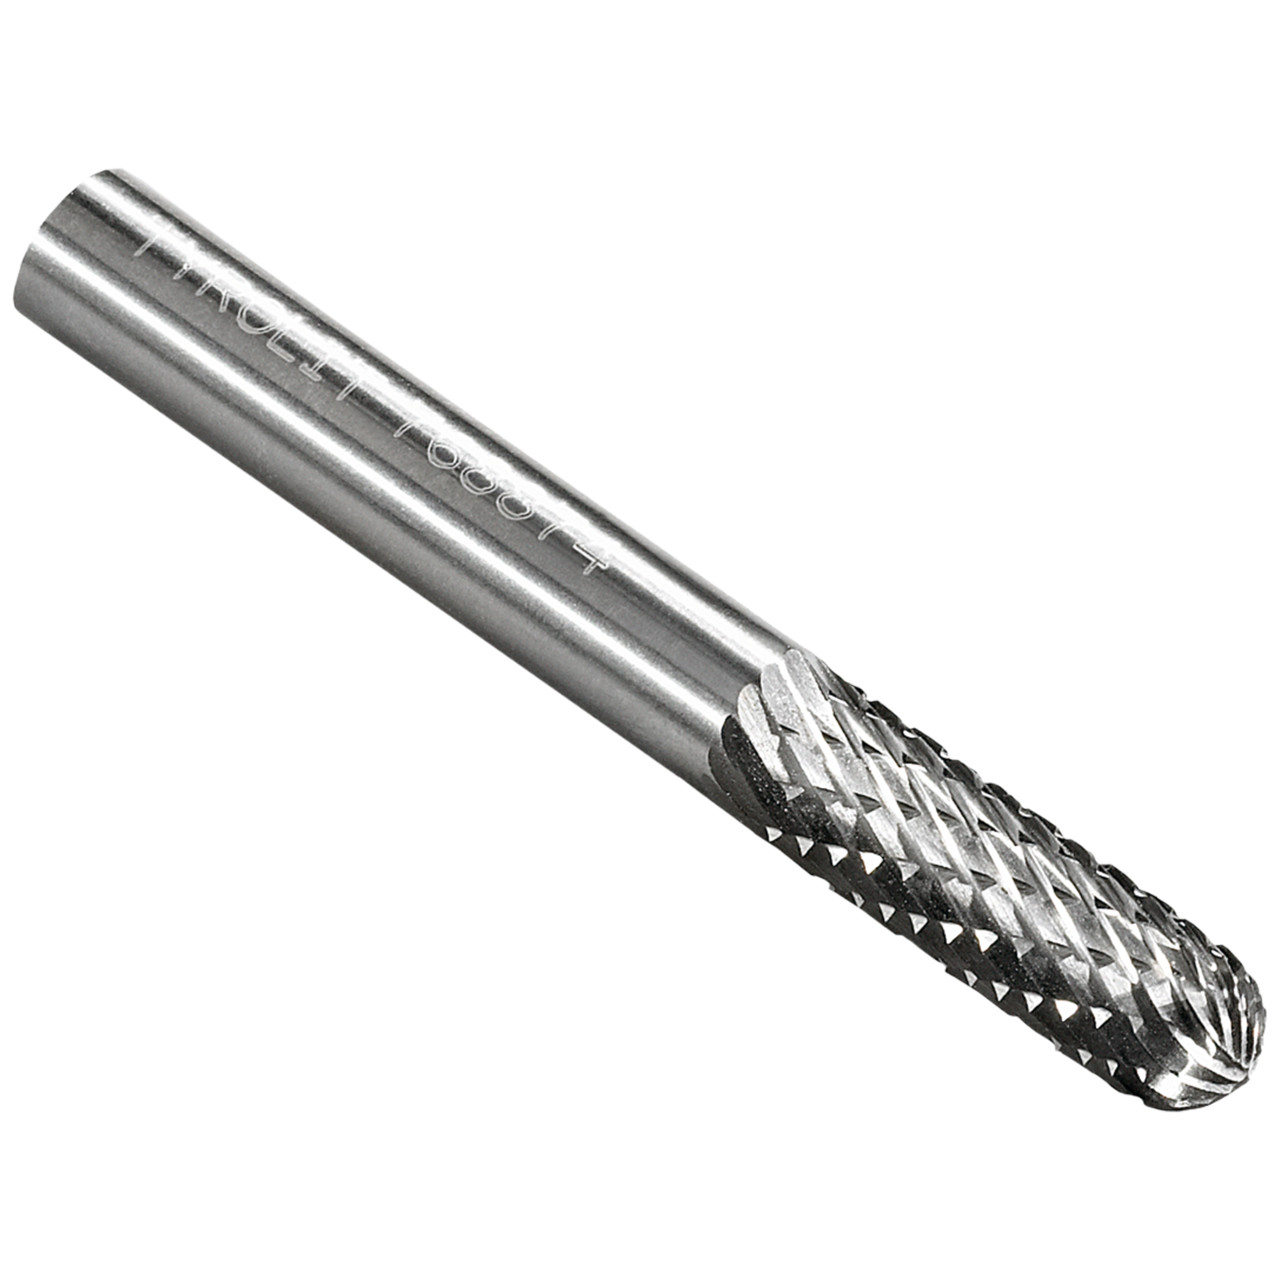 Tyrolit Carbide end mill DxT-SxL 8x19-6x65 For cast iron, steel and stainless steel, shape: 52WRC - cylindrical, Art. 768878